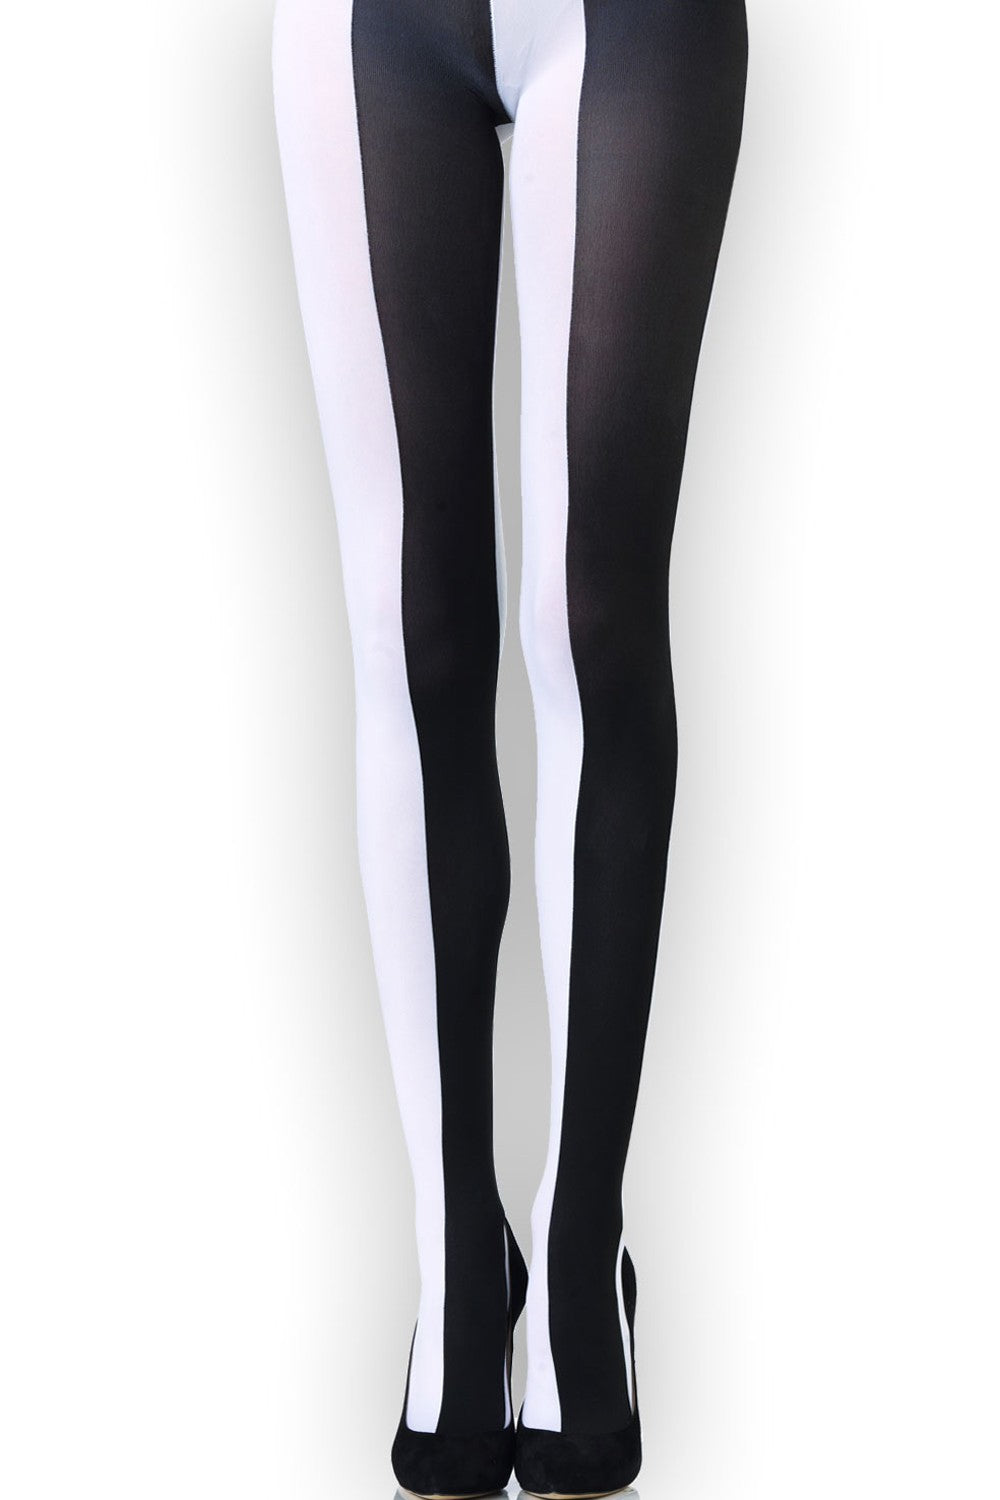 Emilio Cavallini Two Toned Large Vertical Stripes Tights - black and white striped tights